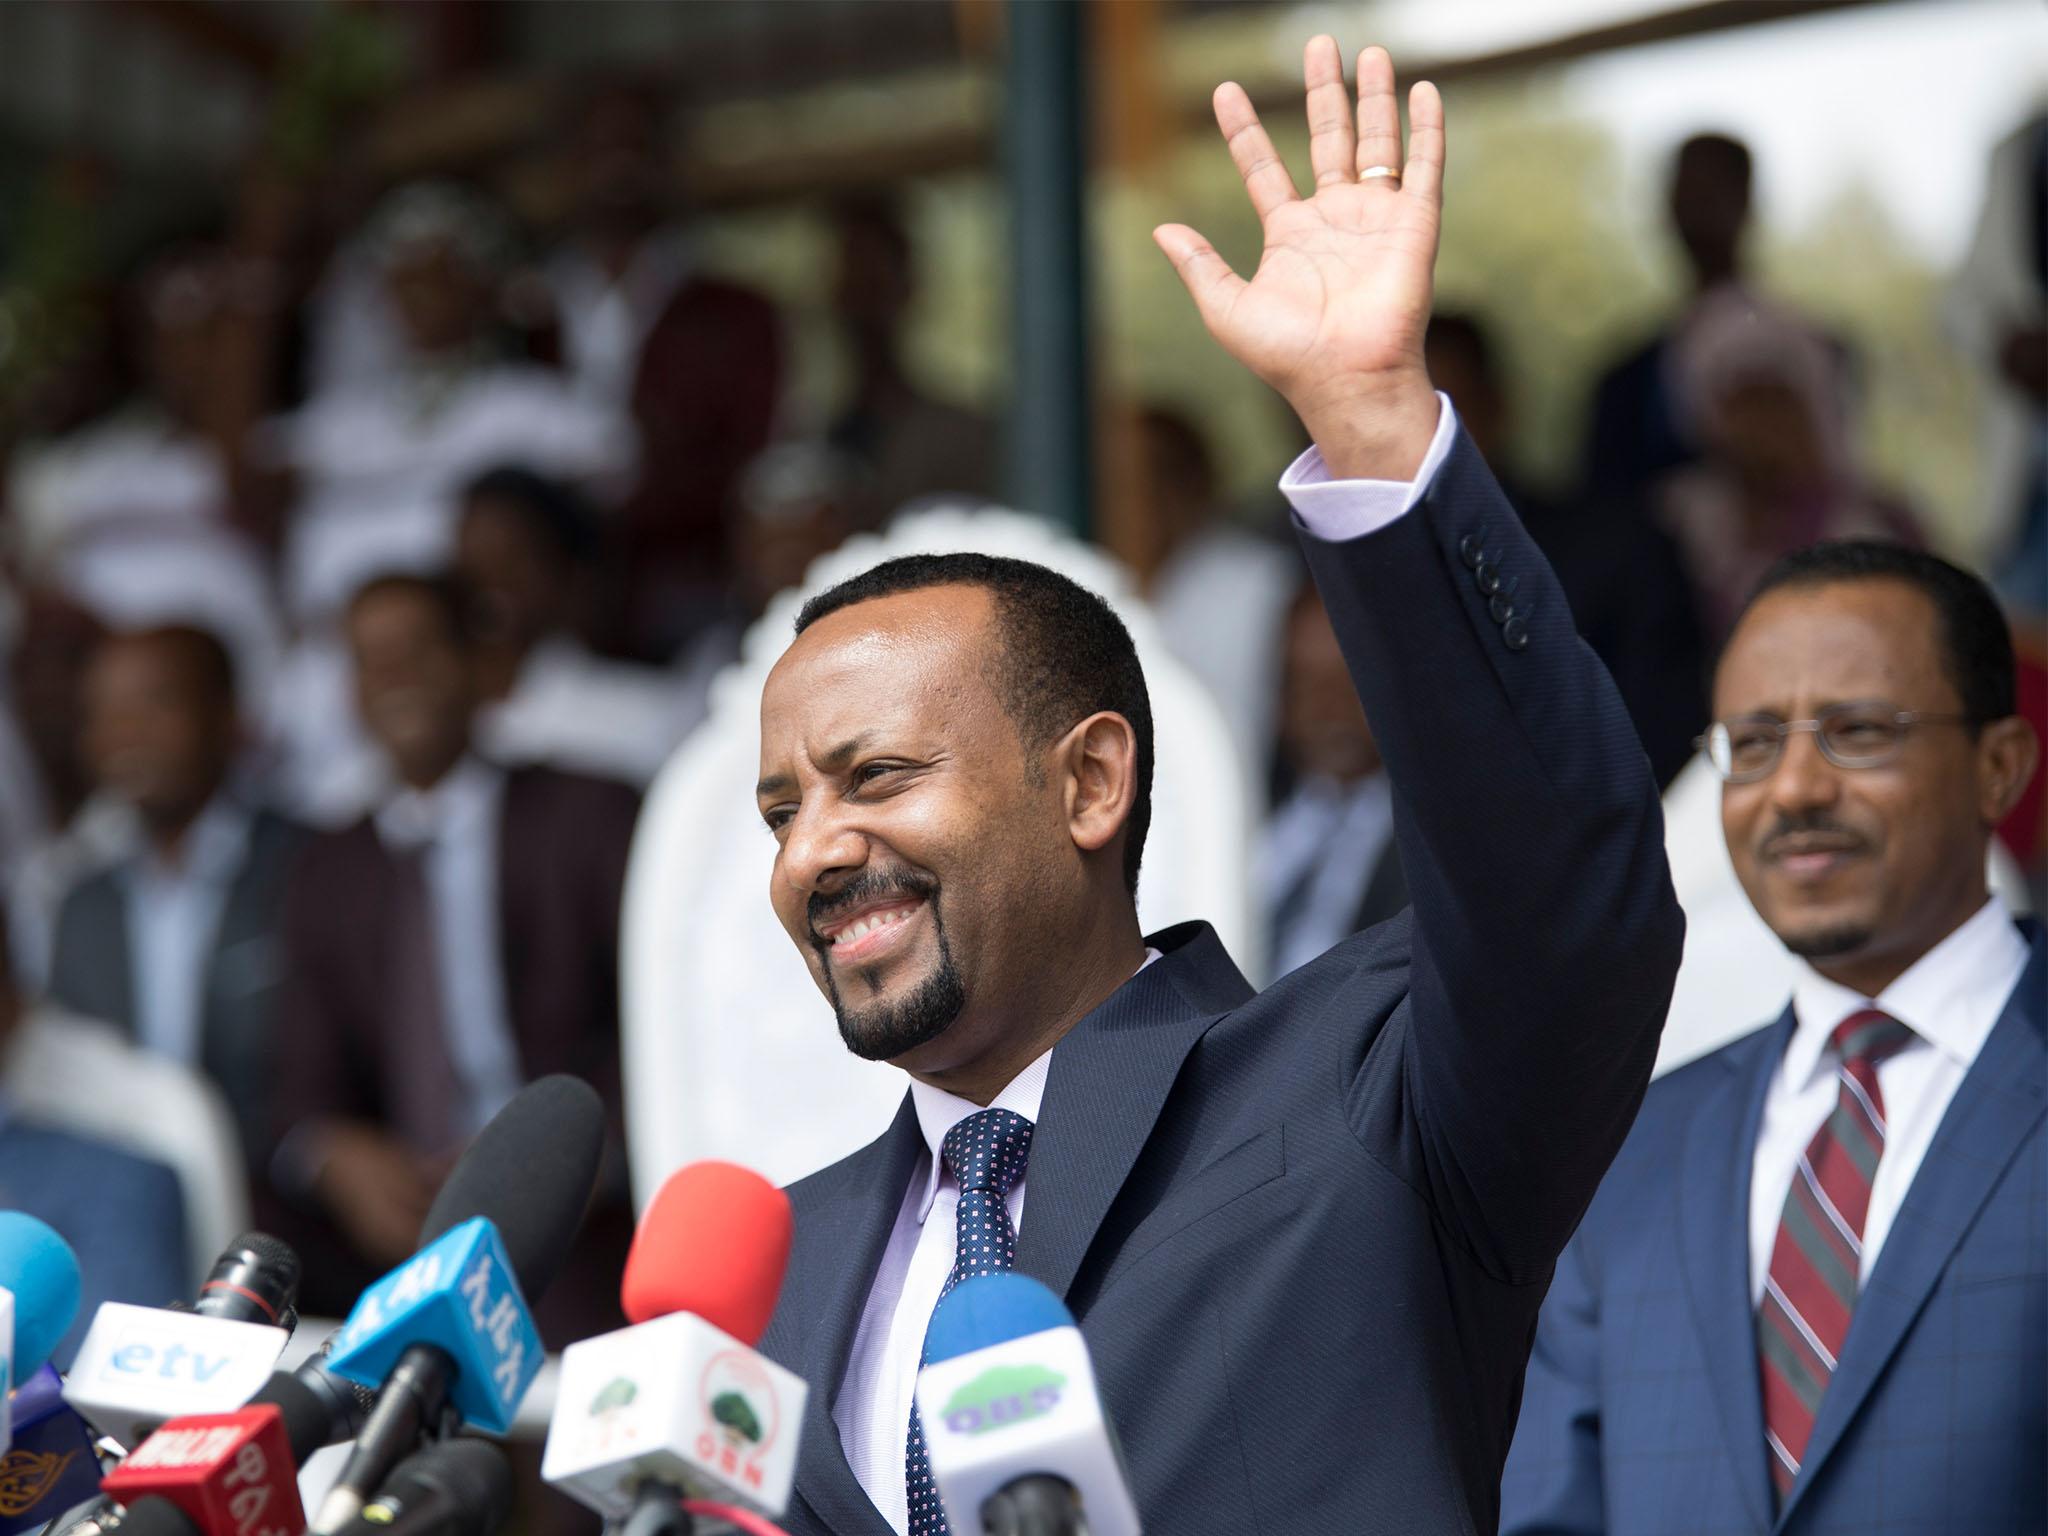 Ethiopian prime minister Abiy Ahmed has called for an end to the stalemate with Eritrea